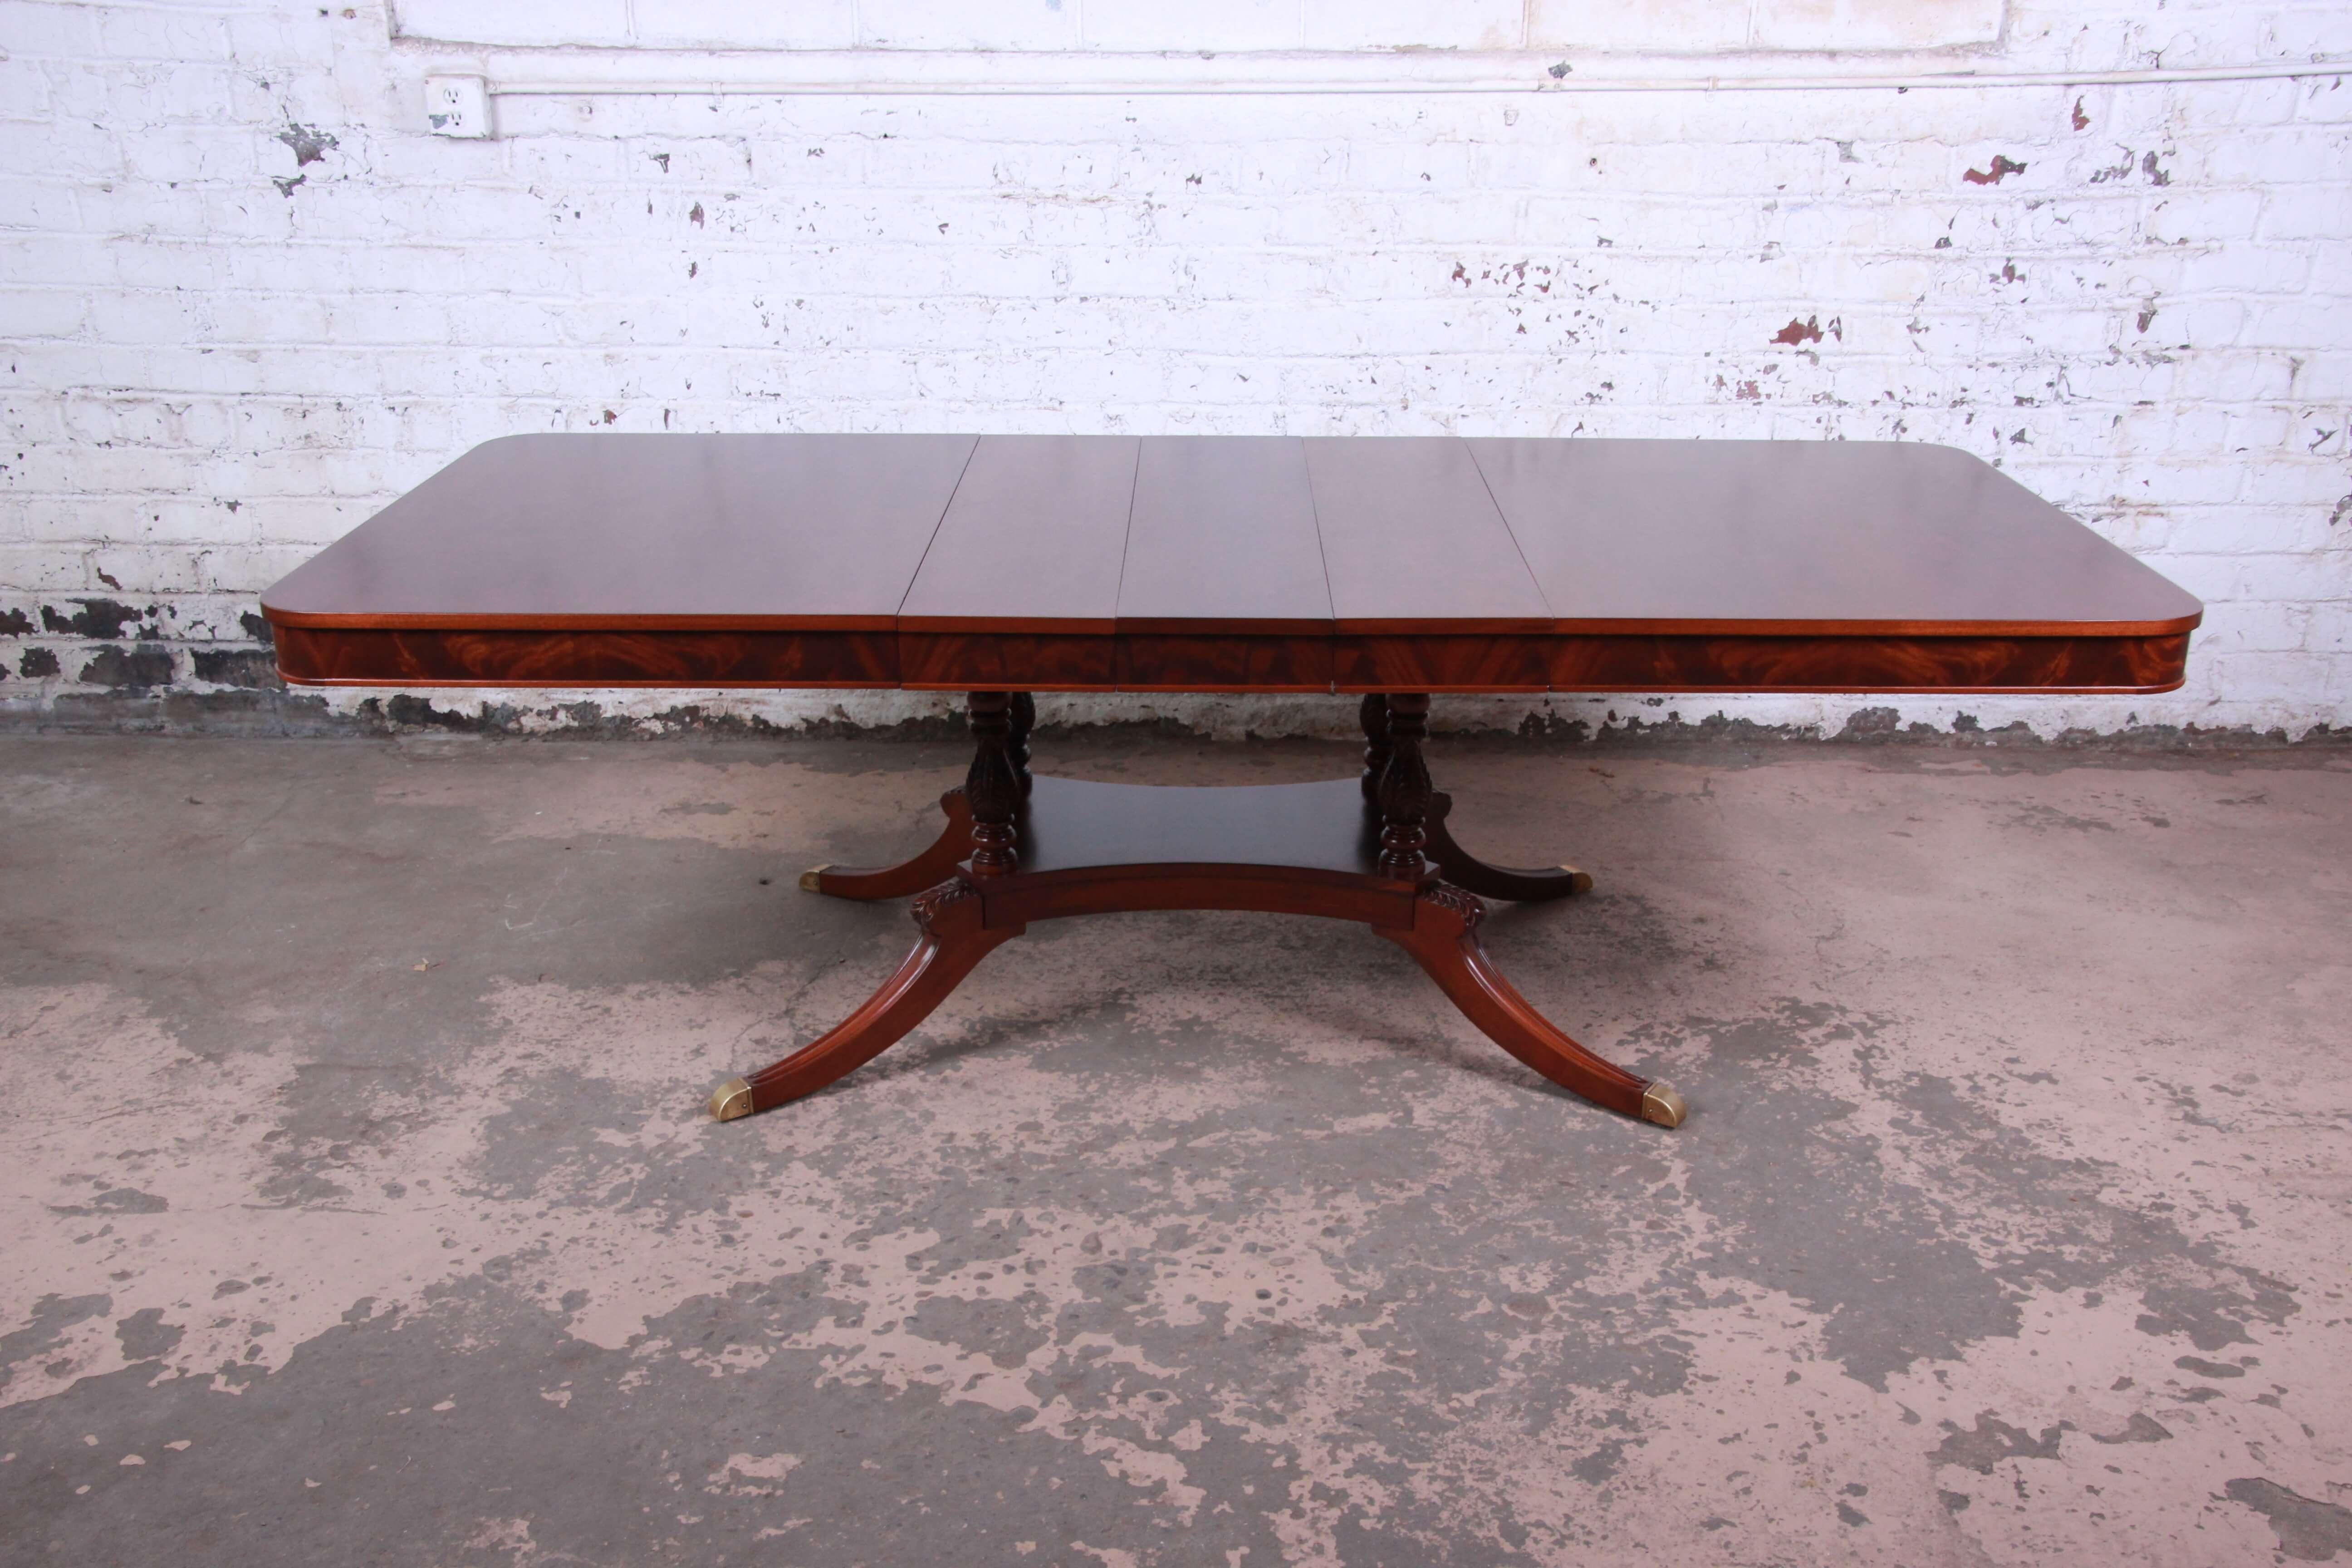 Offering a stunning and elegant custom Romweber mahogany extension dining table. The table extends to 95.28